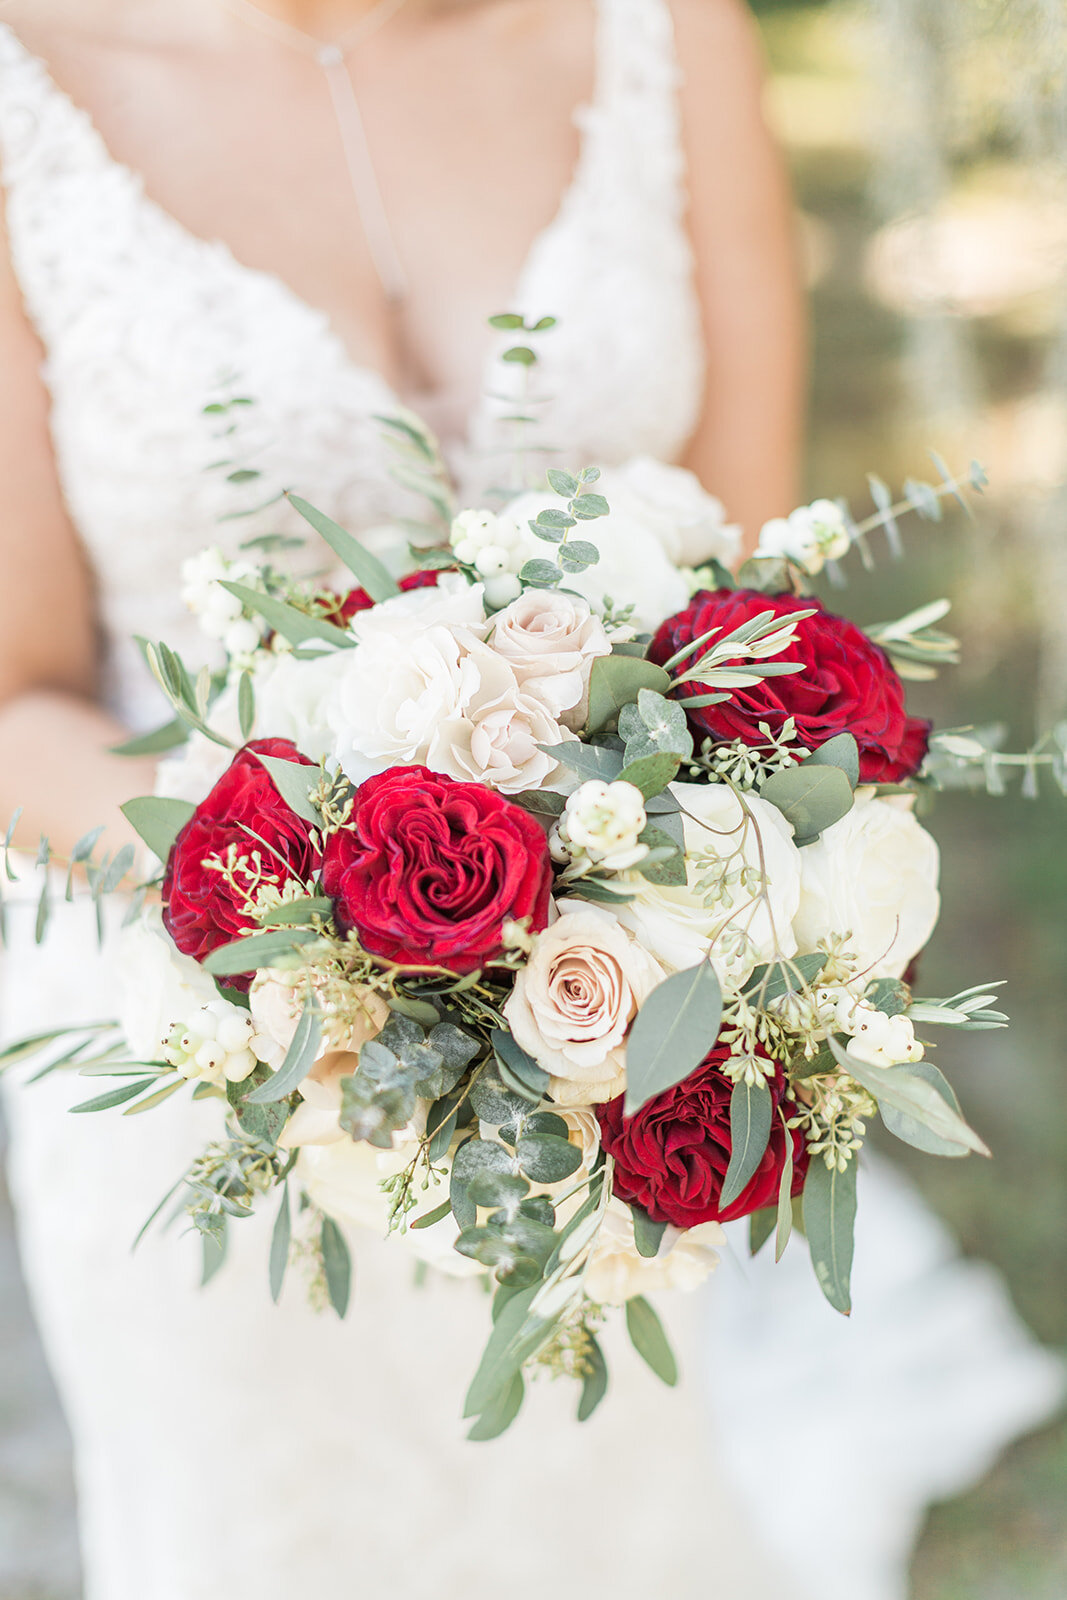 Bluegrass Chic - The Hendricks Photography at Royal Crest Room Bridal Bouquet of Burgundy White and Greens